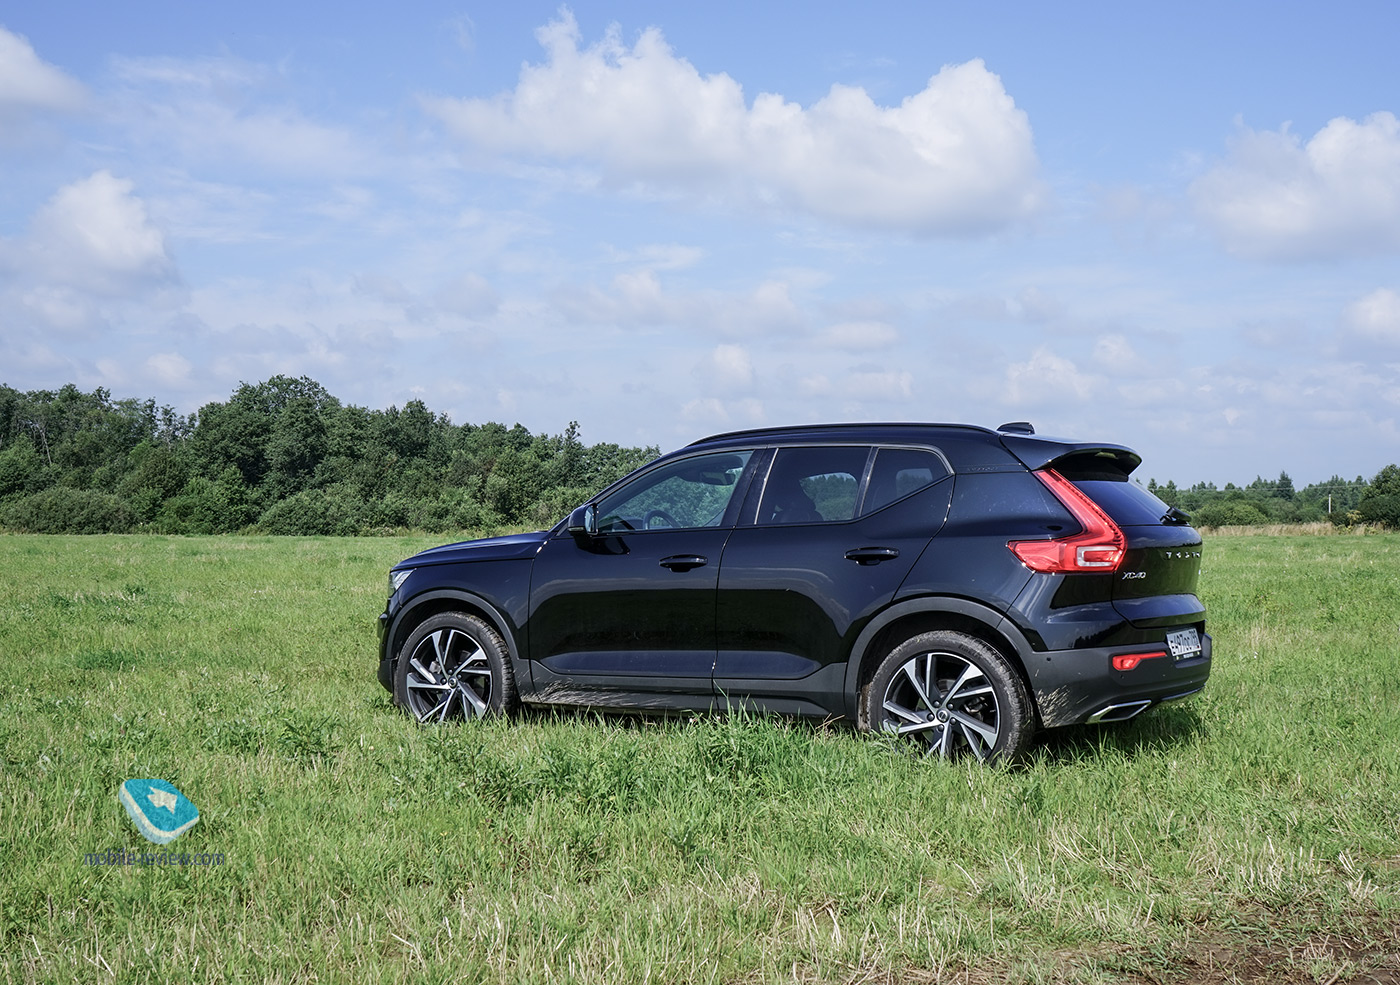 Volvo XC40 test. The best compact crossover?